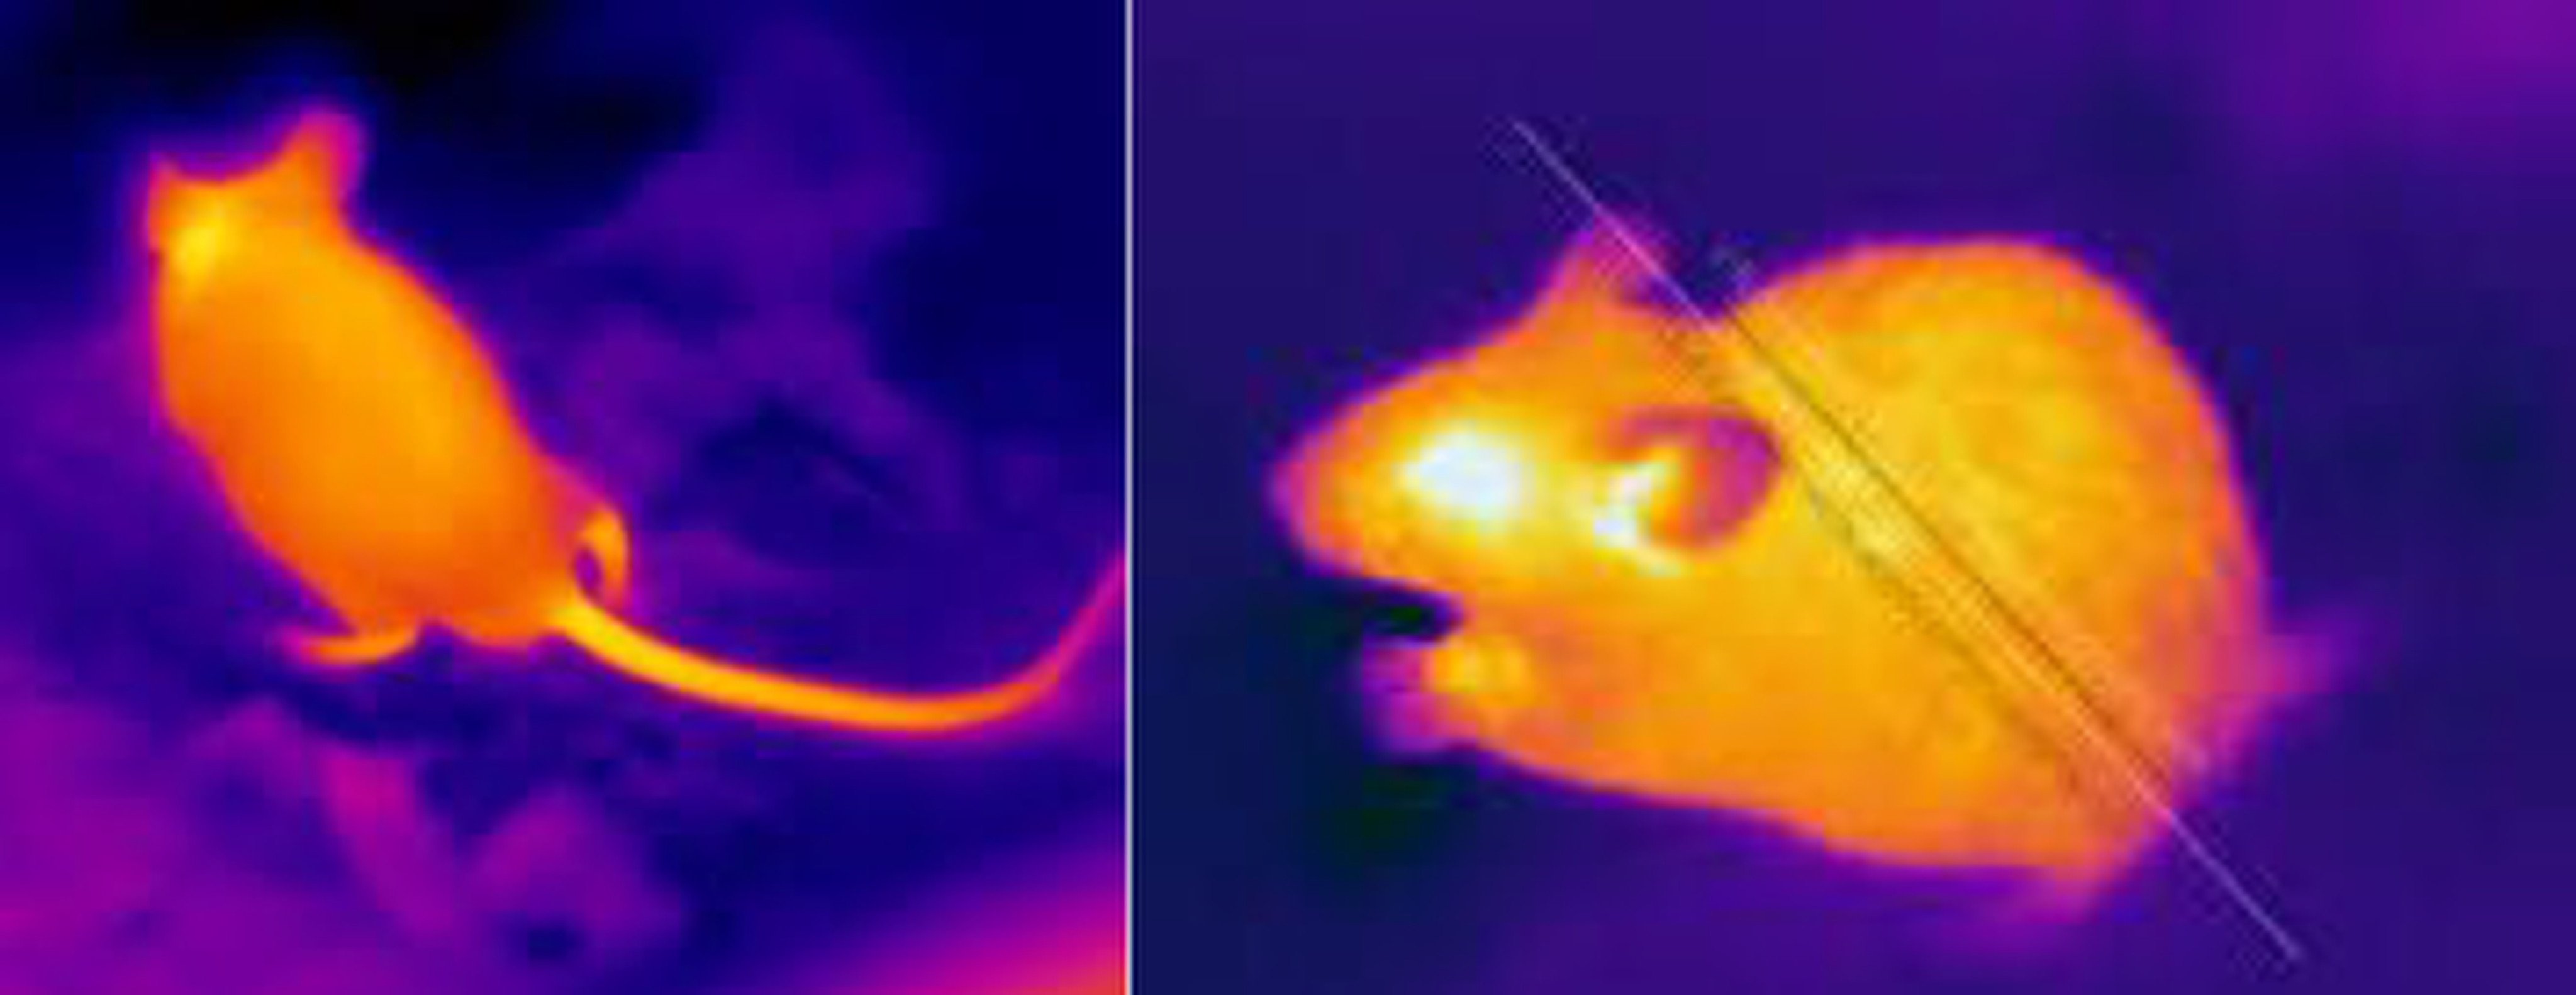 Images captured by the city’s new ratbuster thermal imaging cameras. Photo: Handout